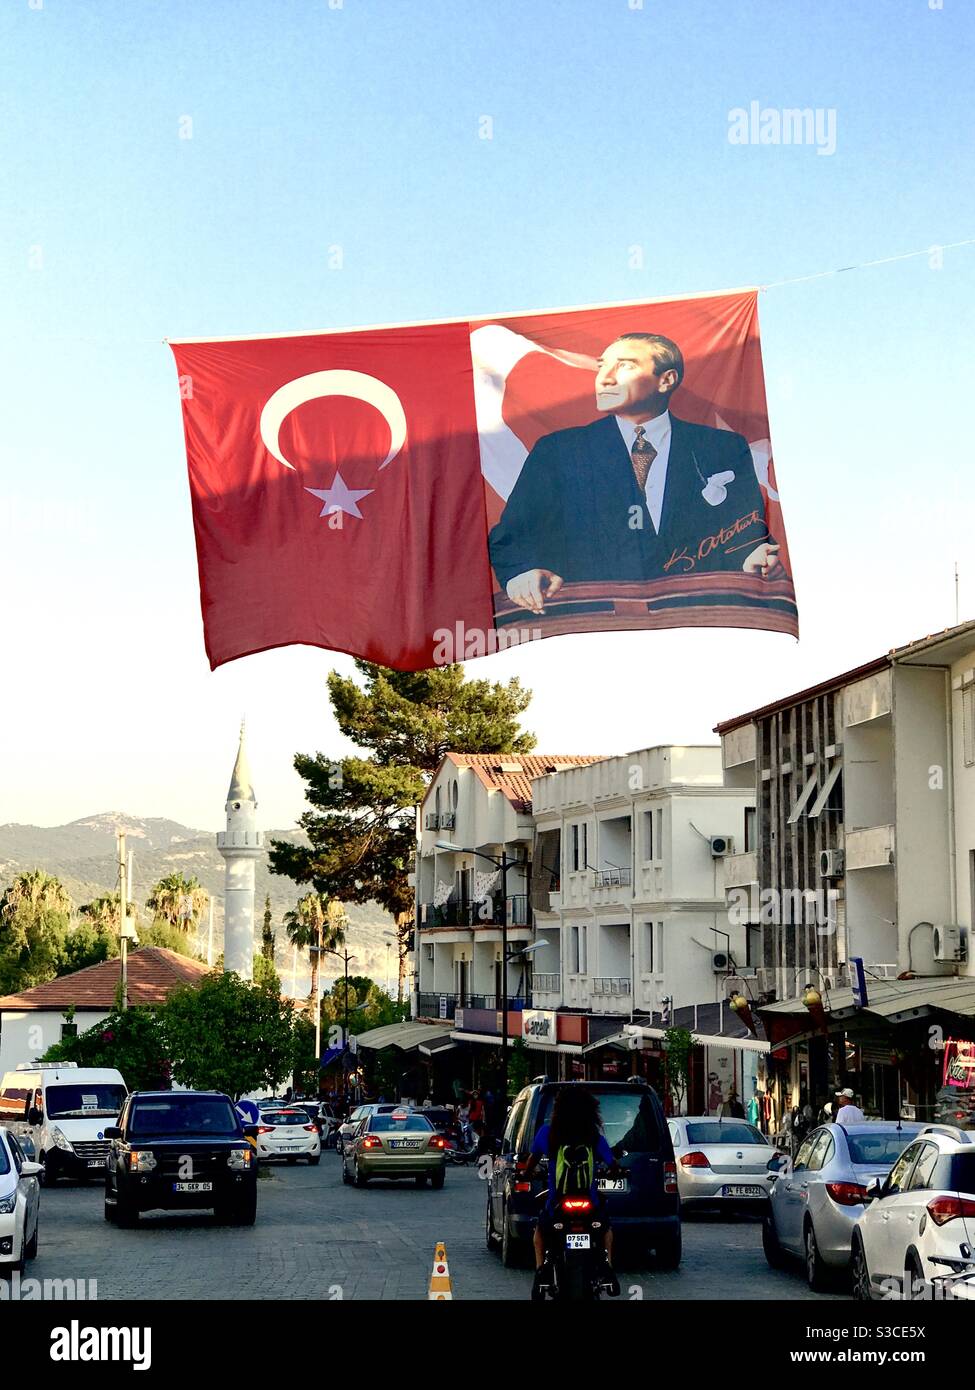 Turkish flag and Ataturk flag hangs above the road with a minaret in the background, Kas, Turkey Stock Photo